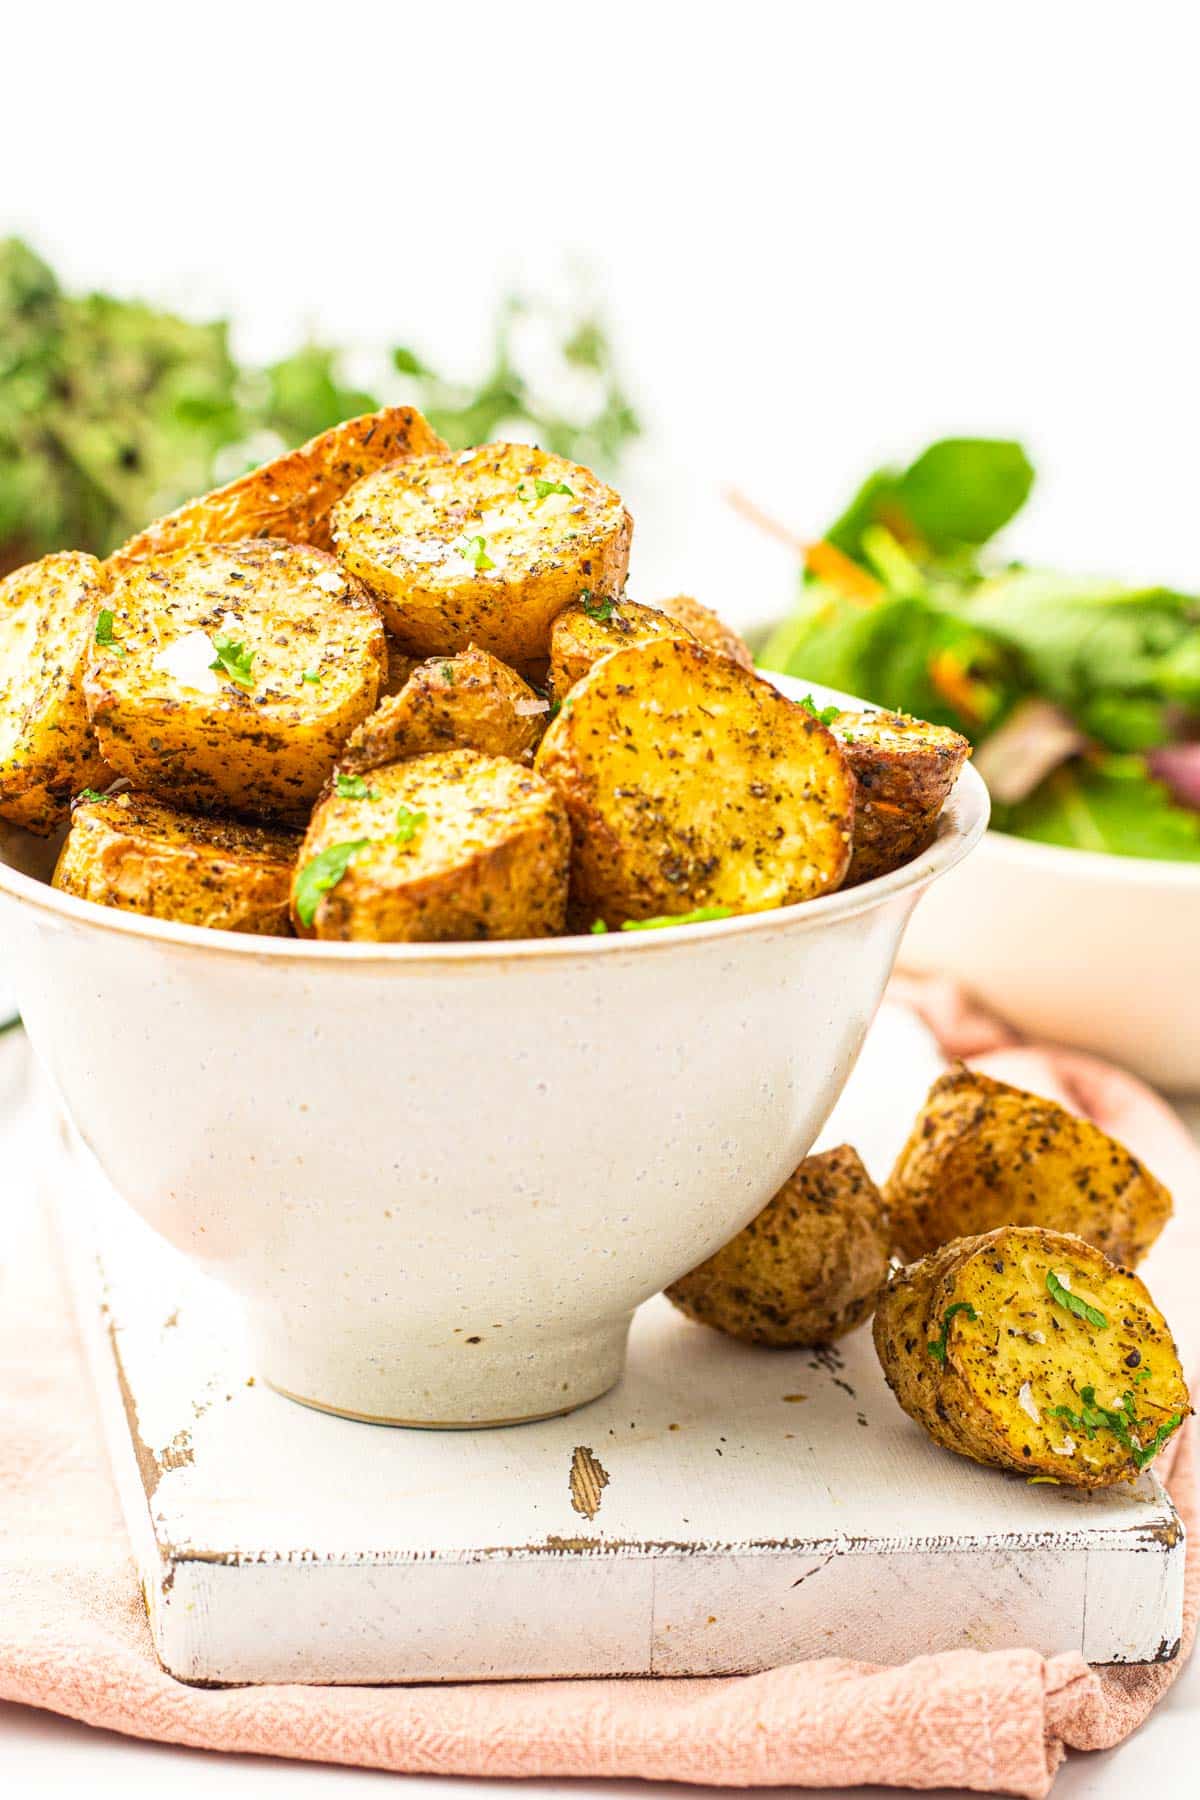 bowl full of chopped roasted potatoes covered in seasonings and parsley